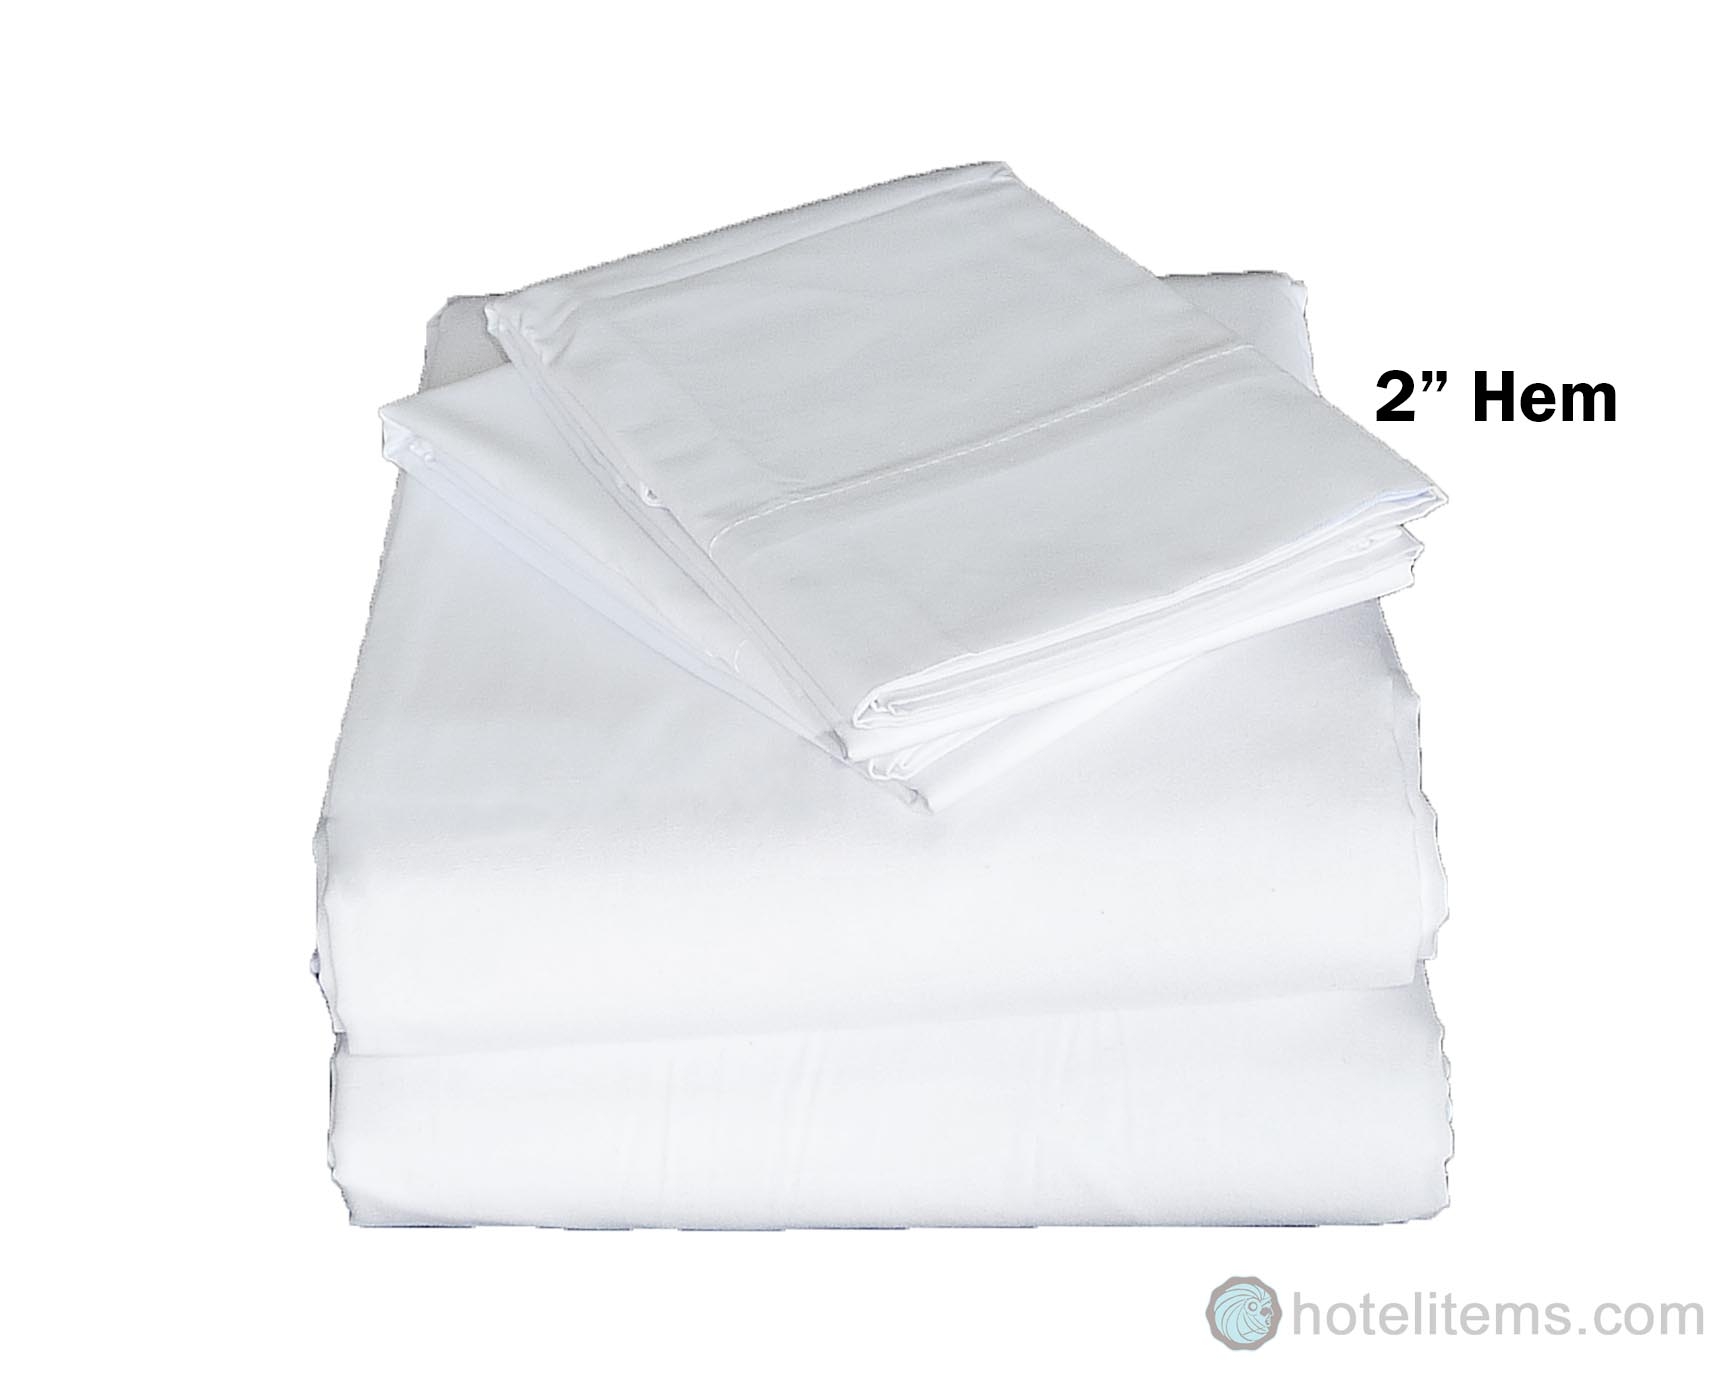 3 new white full size 54x80x9 fitted sheet t180 percale hotel linen cotton rich 